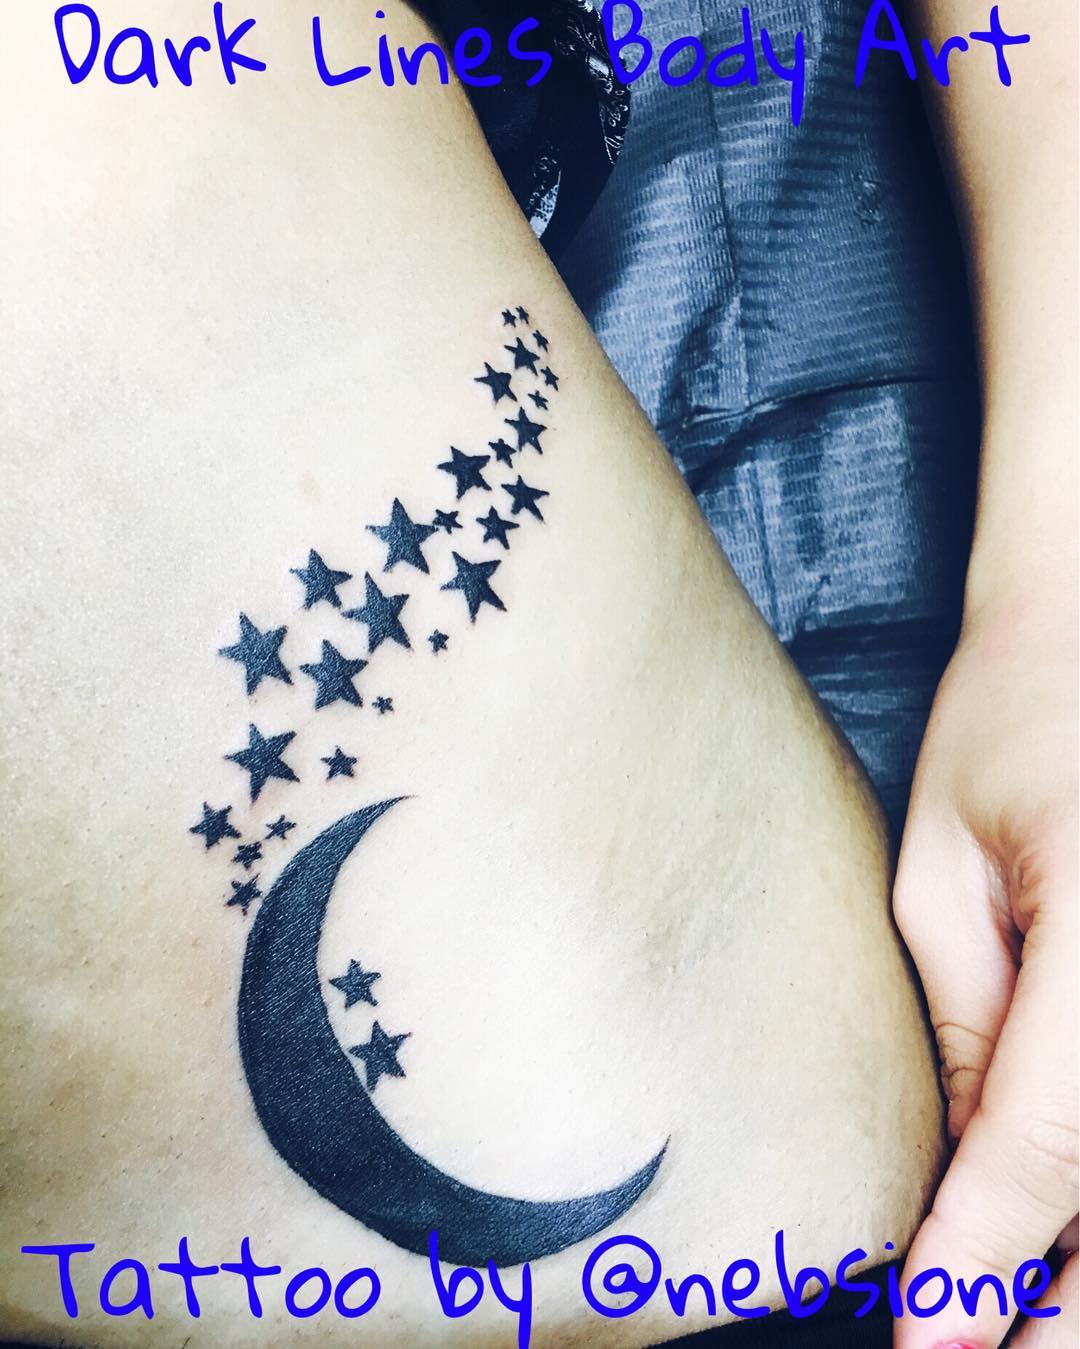 Moon and Star Tattoos